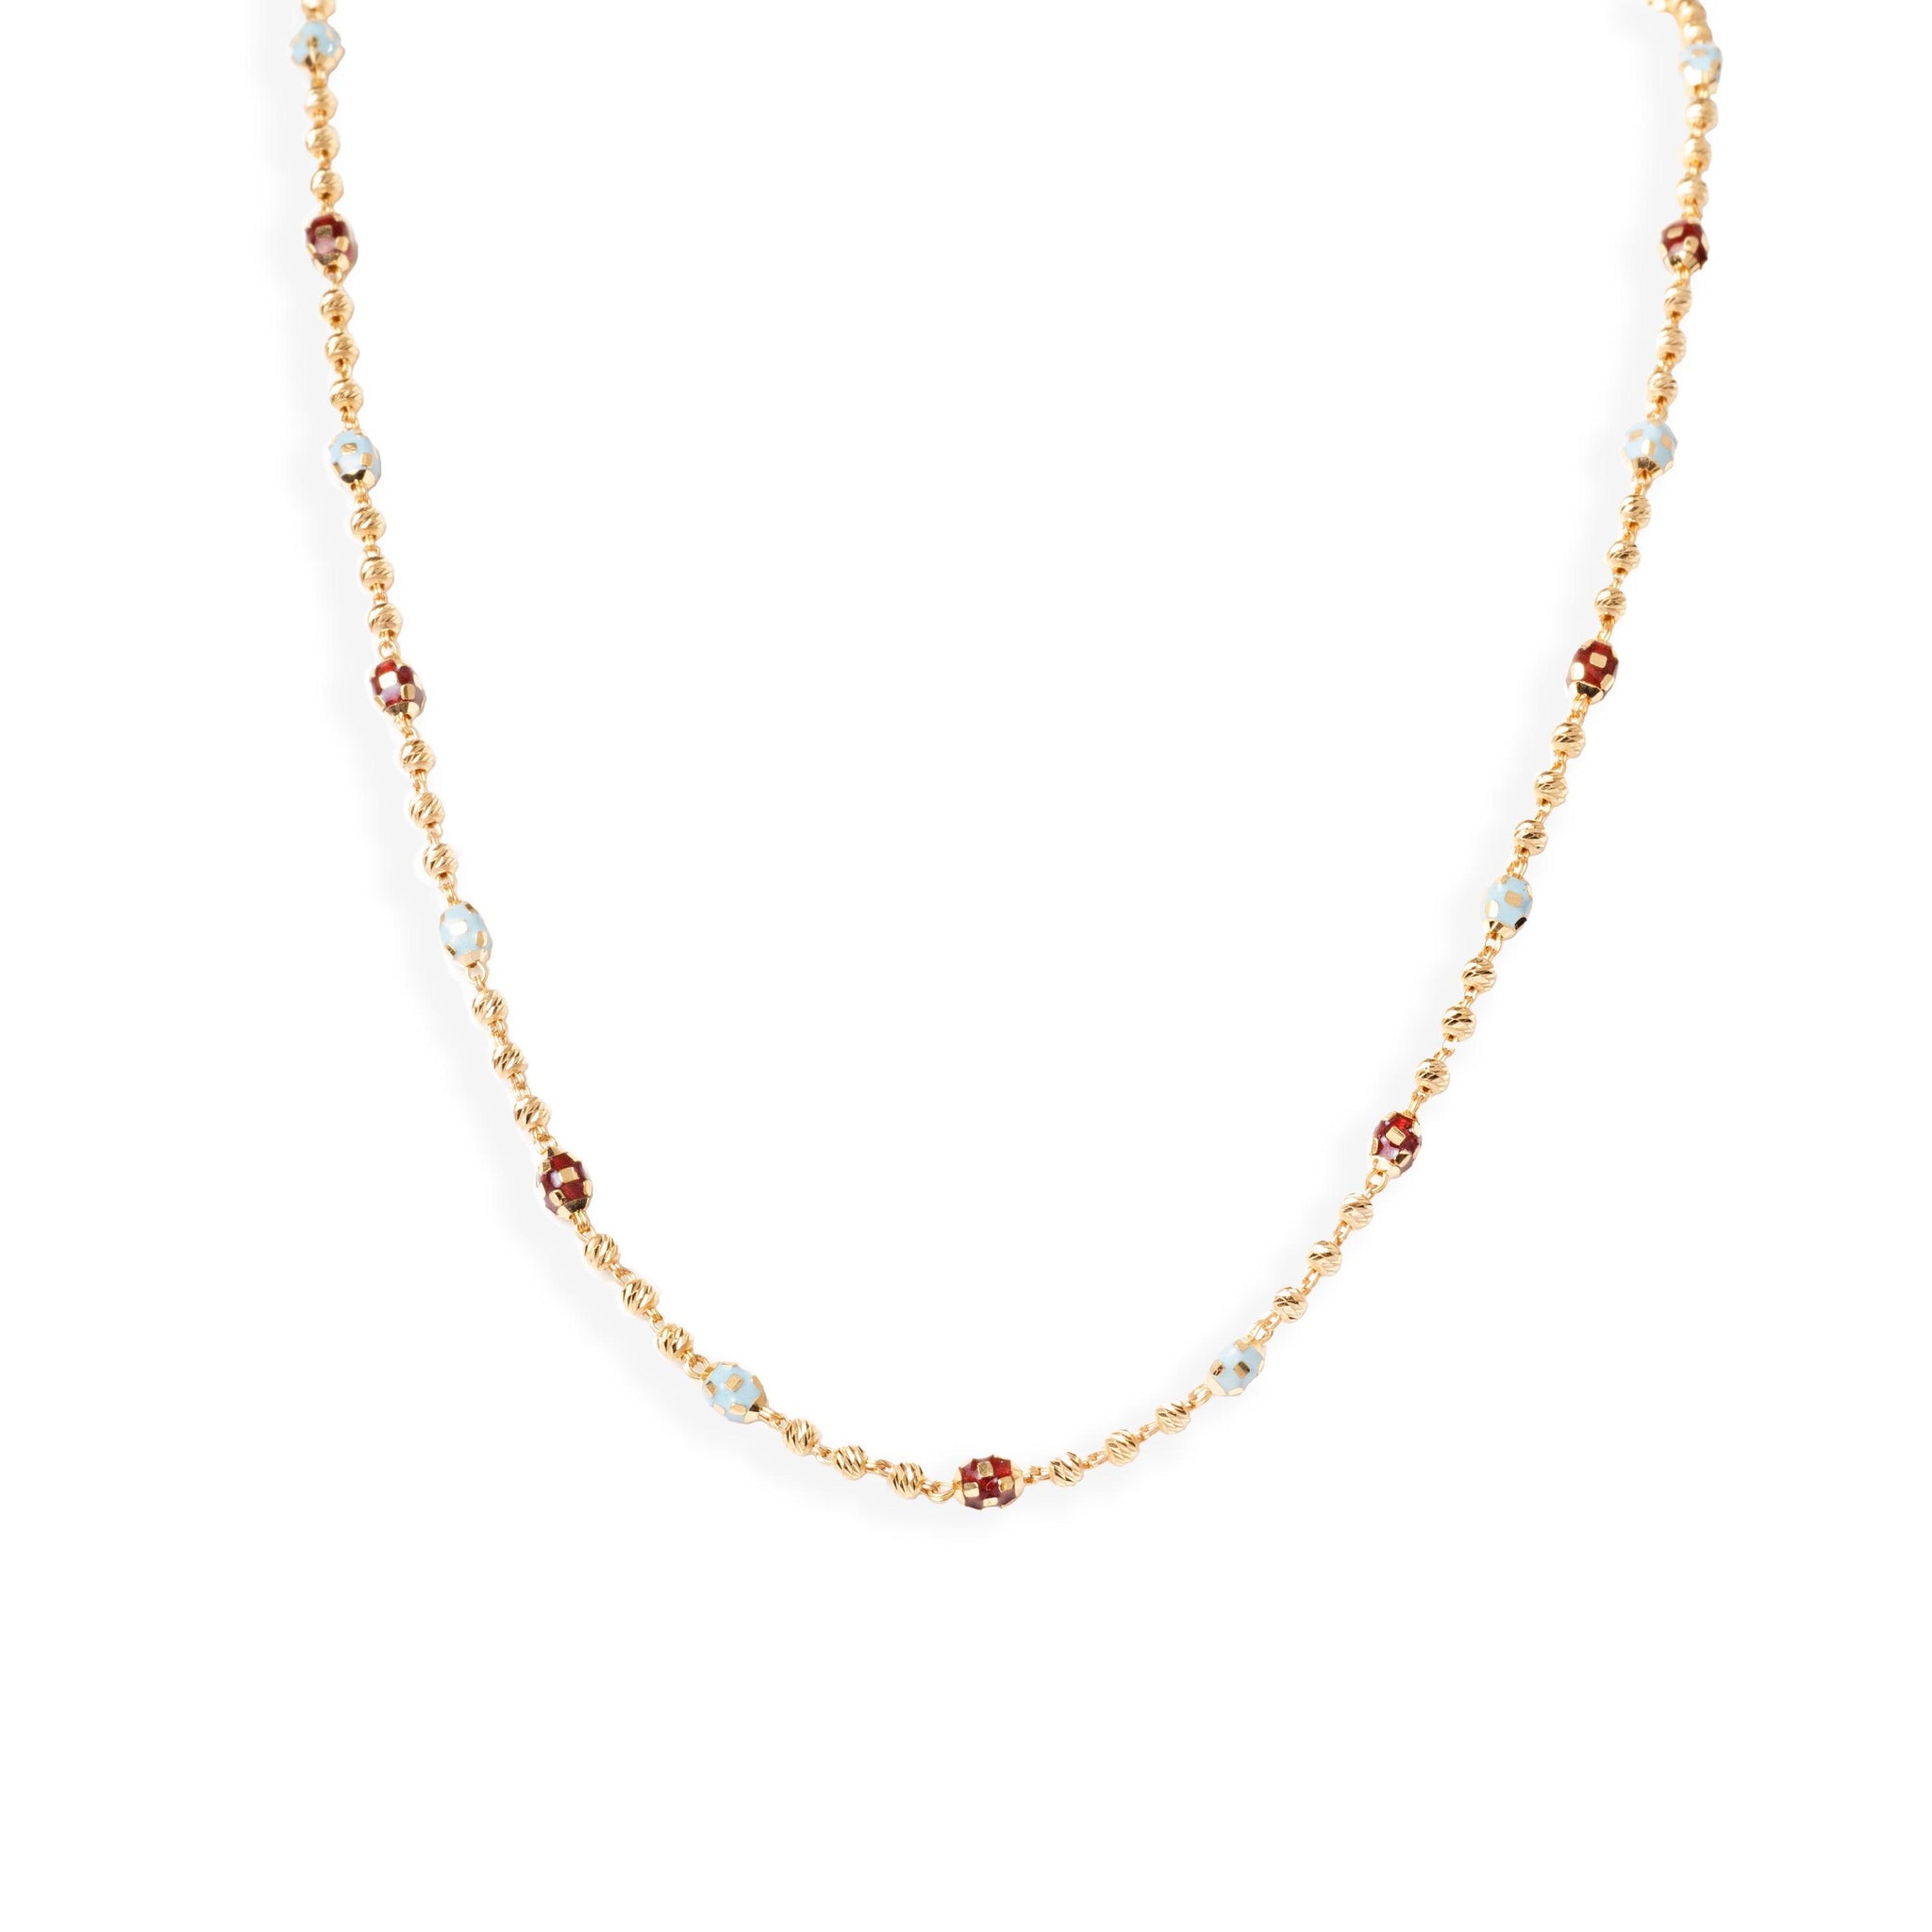 22ct Gold Beaded Necklace with Enamel Design and Hook Clasp (13.6g) C-7130